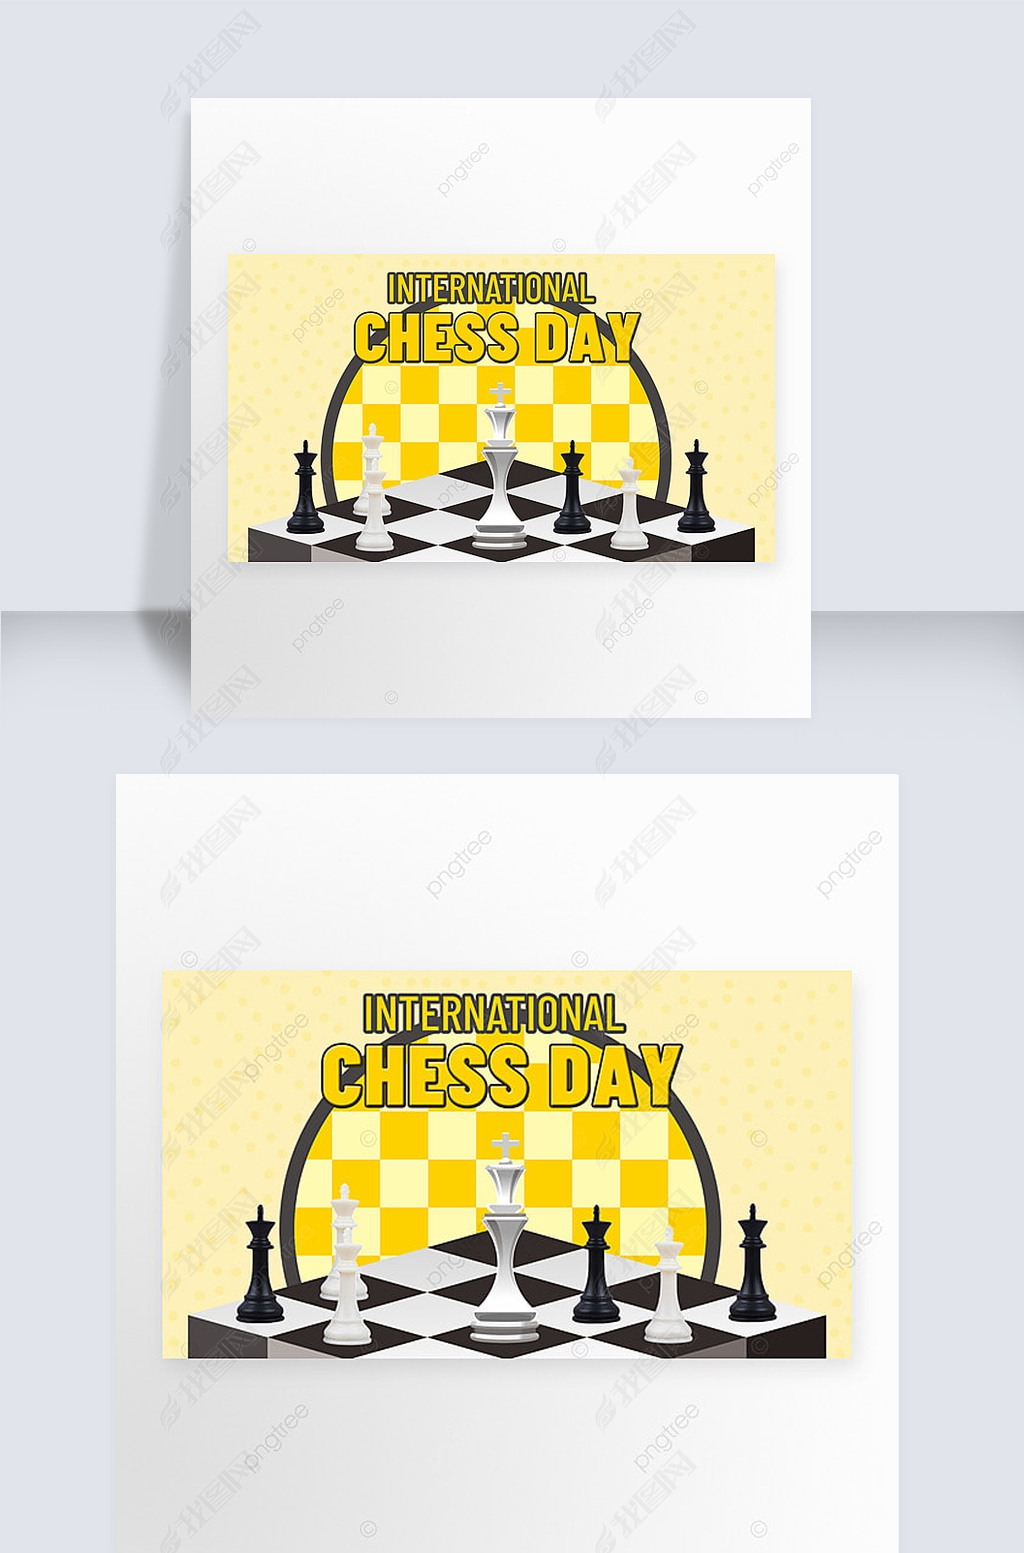 international chess day yellow simple promotion exhibition